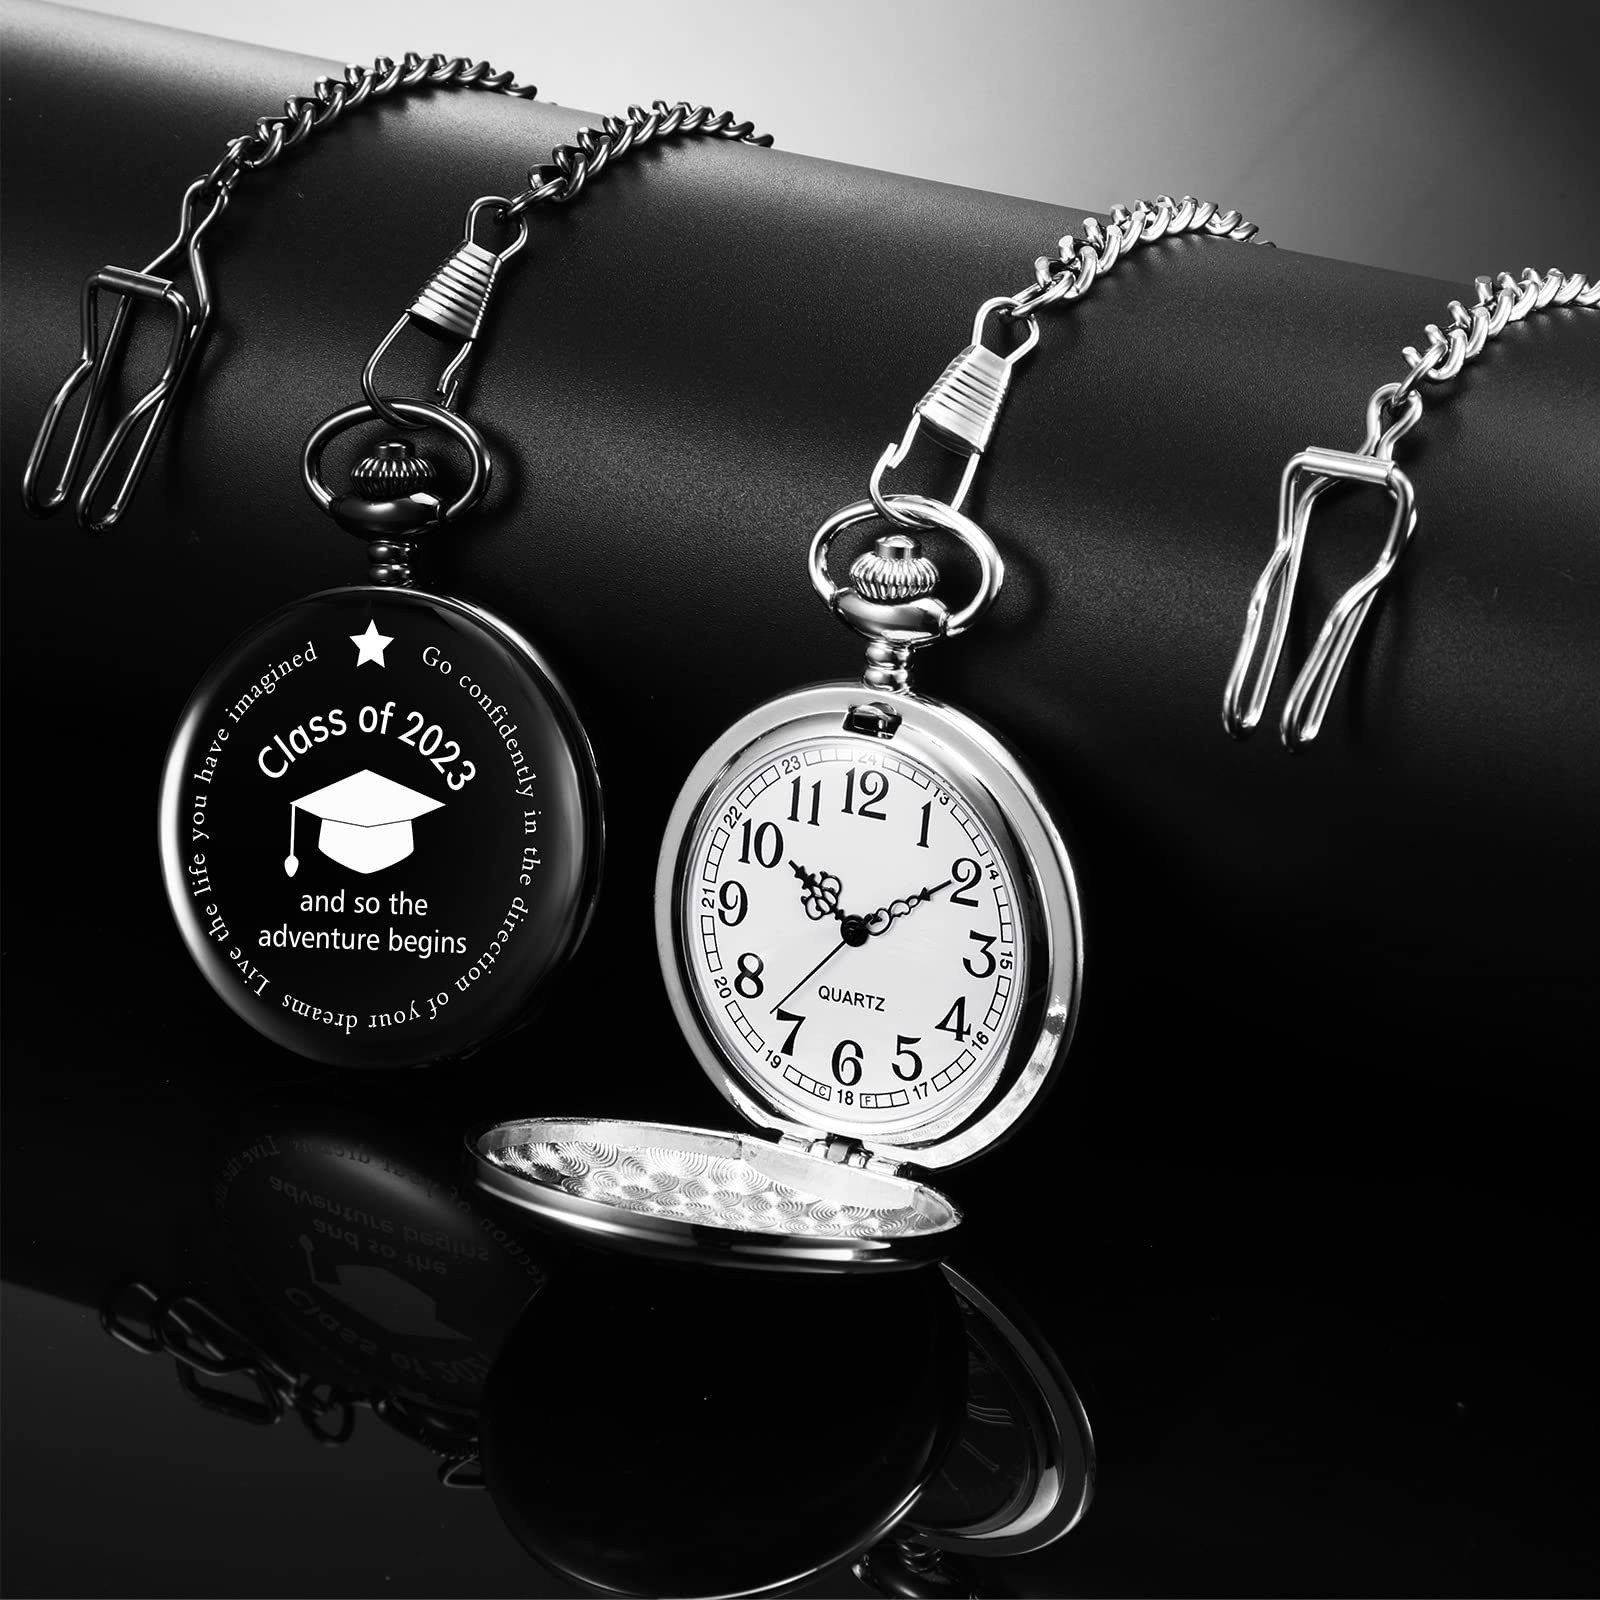 2 Pieces Class of 2023 Pocket Watch Graduation Gift So The Adventure Begins Graduation Gift with Storage Box and Chain for College High School Graduation